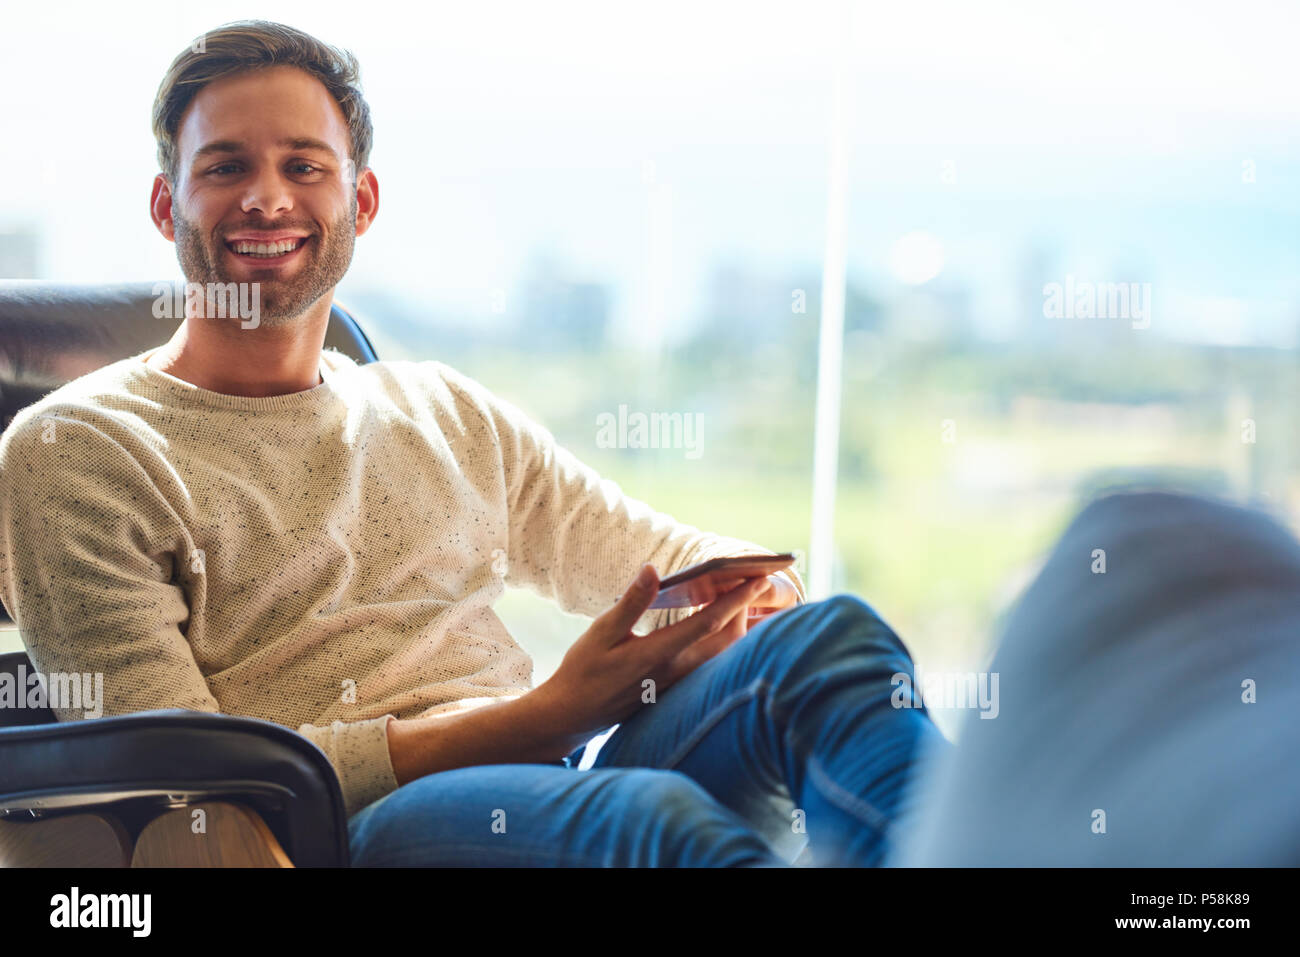 Caucasian man sitting on a modern couch next to large glass windows with a stunning view behind him as he smiles at camera with his phone still being held in his hands. Stock Photo